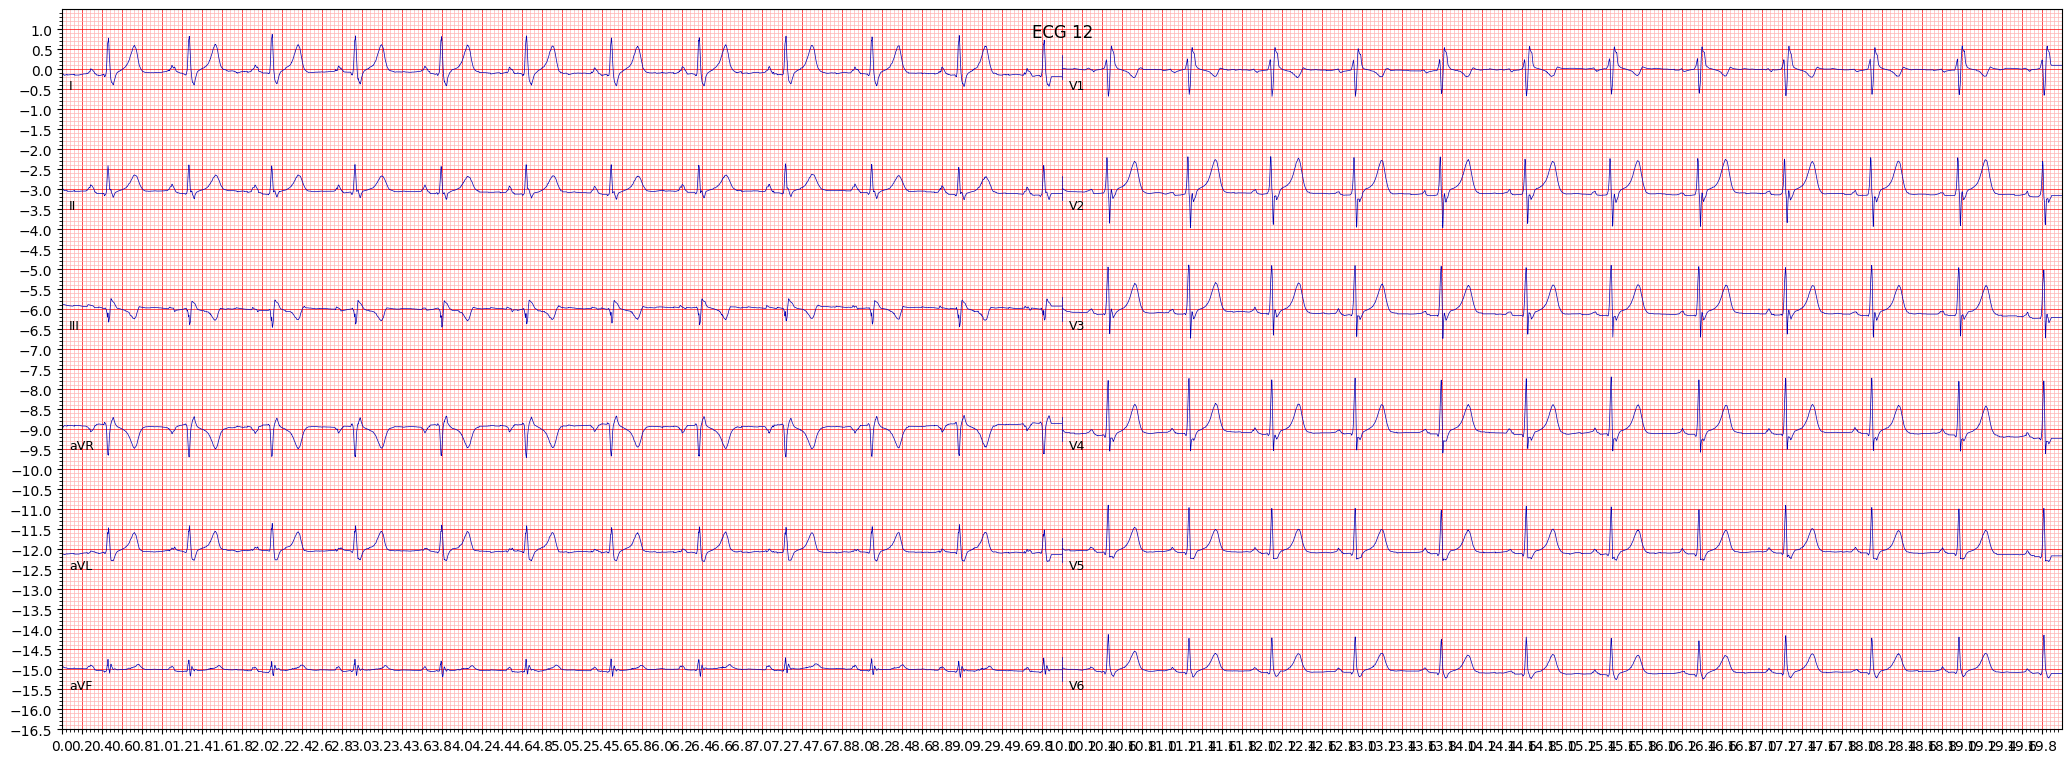 incomplete right bundle branch block (IRBBB) example 950